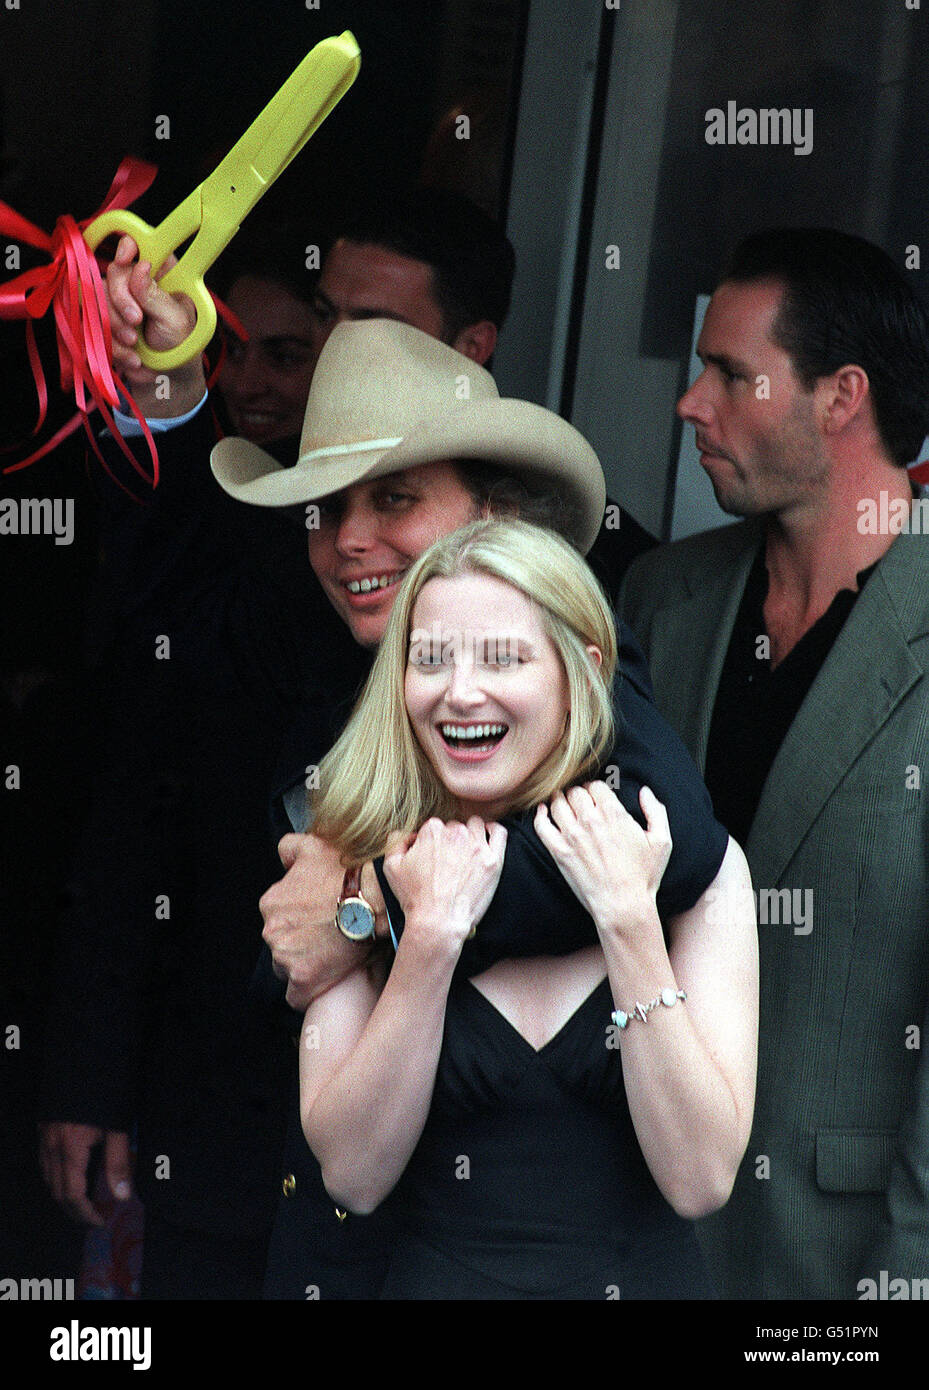 Bridget Fonda Cannes 2000. American actress Bridget Fonda and country singer Dwight Yoakam at the Cannes film festival 2000, in France. Stock Photo